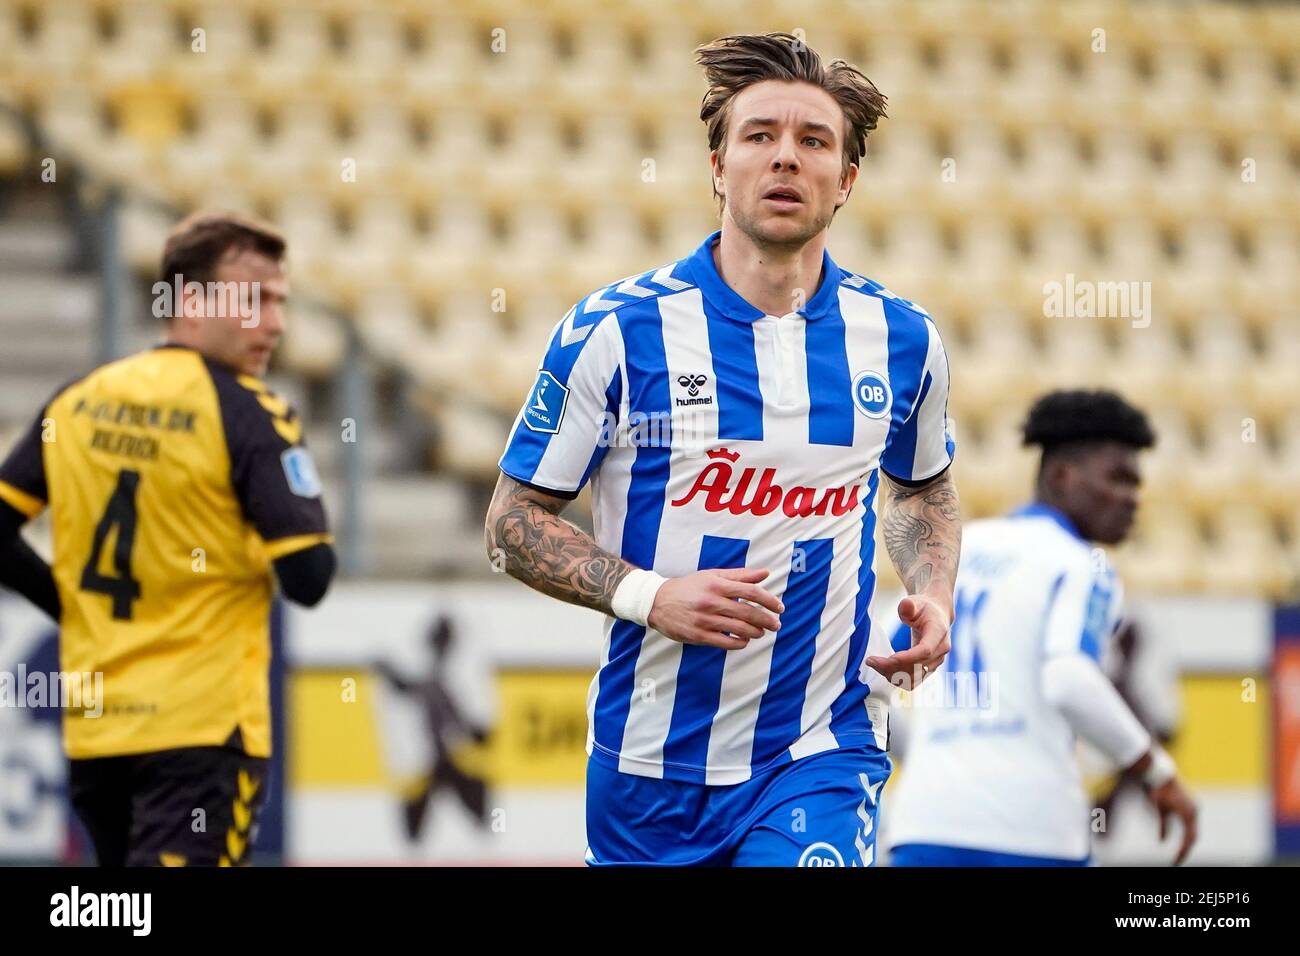 Horsens, Denmark. 21st Feb, 2021. Mart Lieder of seen during the 3F Superliga match between AC Horsens and Odense Boldklub at Arena in Horsens. (Photo Credit: Gonzales Photo/Alamy Live